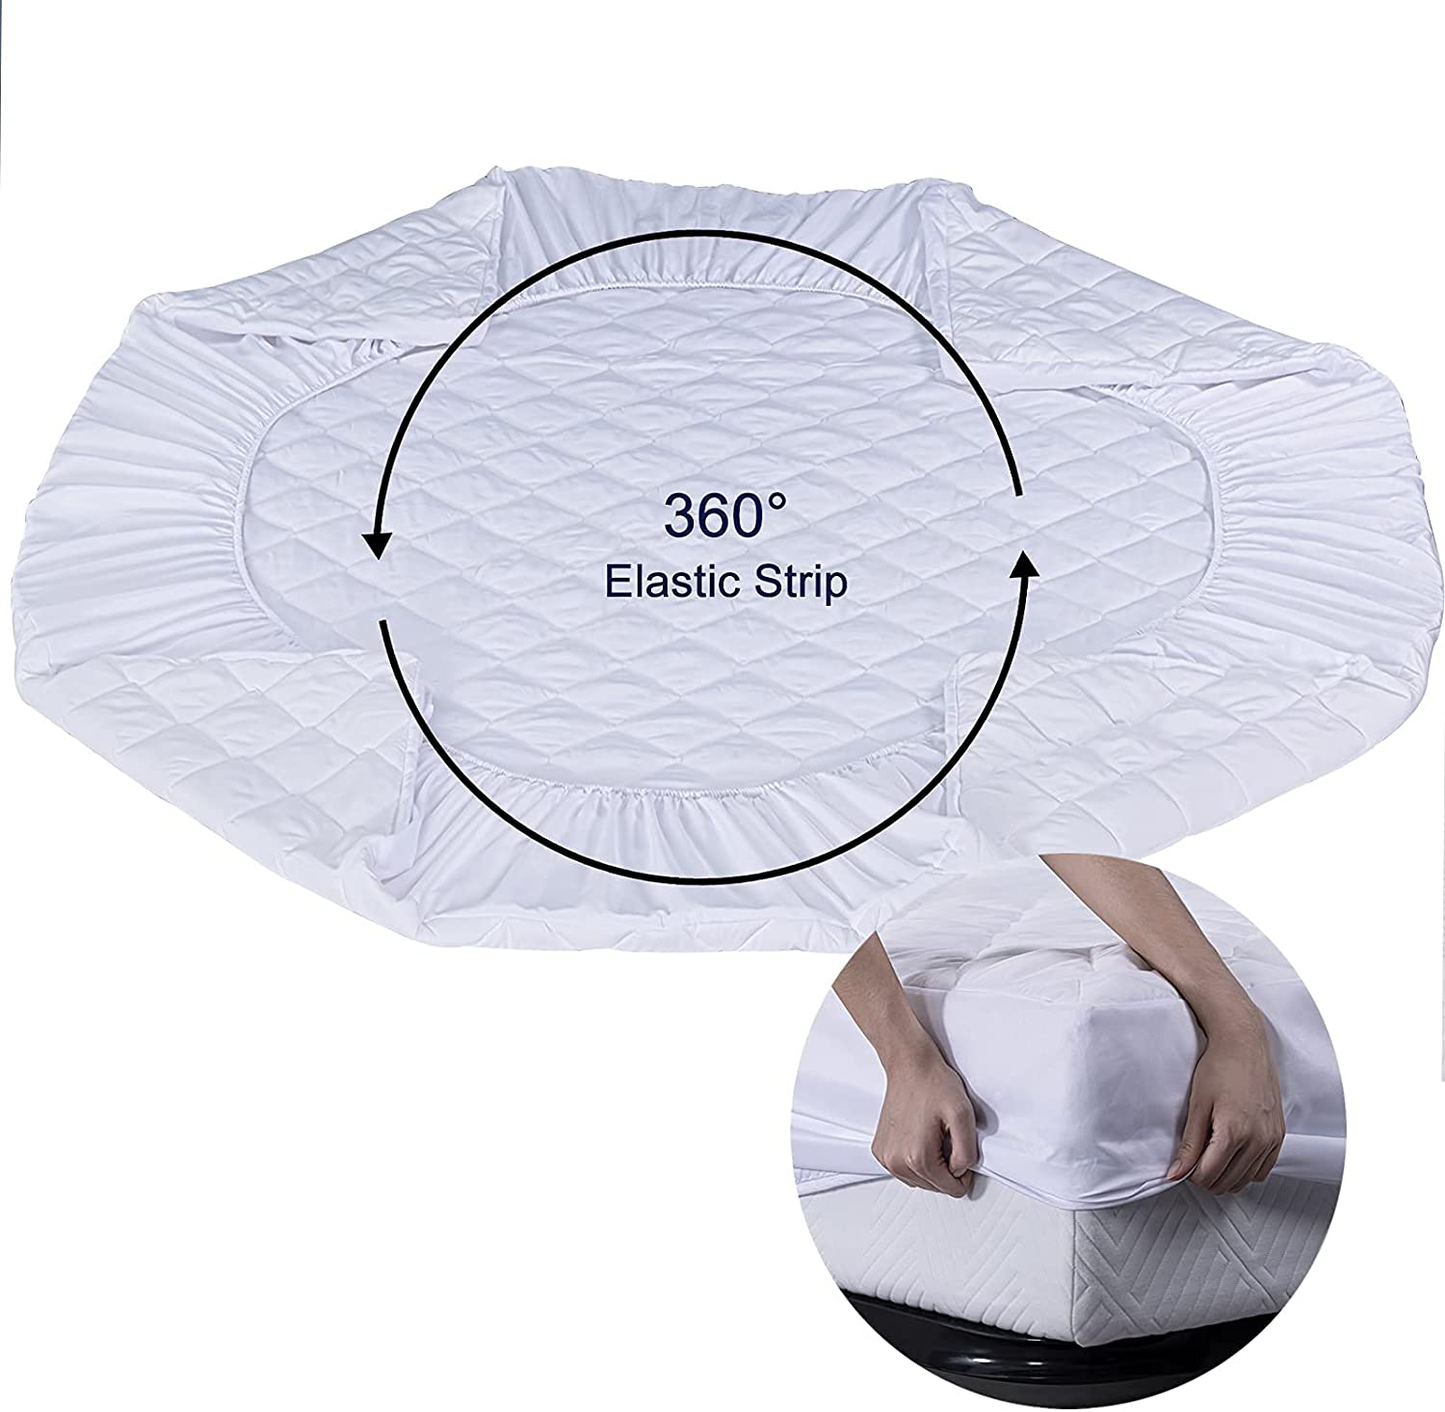 Molblly King Quilted Fitted Mattress Pad Cooling Fluffy Bed Topper with 18 Inch Deep Pocket Breathable & Noiseless Mattress Protector Soft Bed Mattress Cover, White (76"x 80")